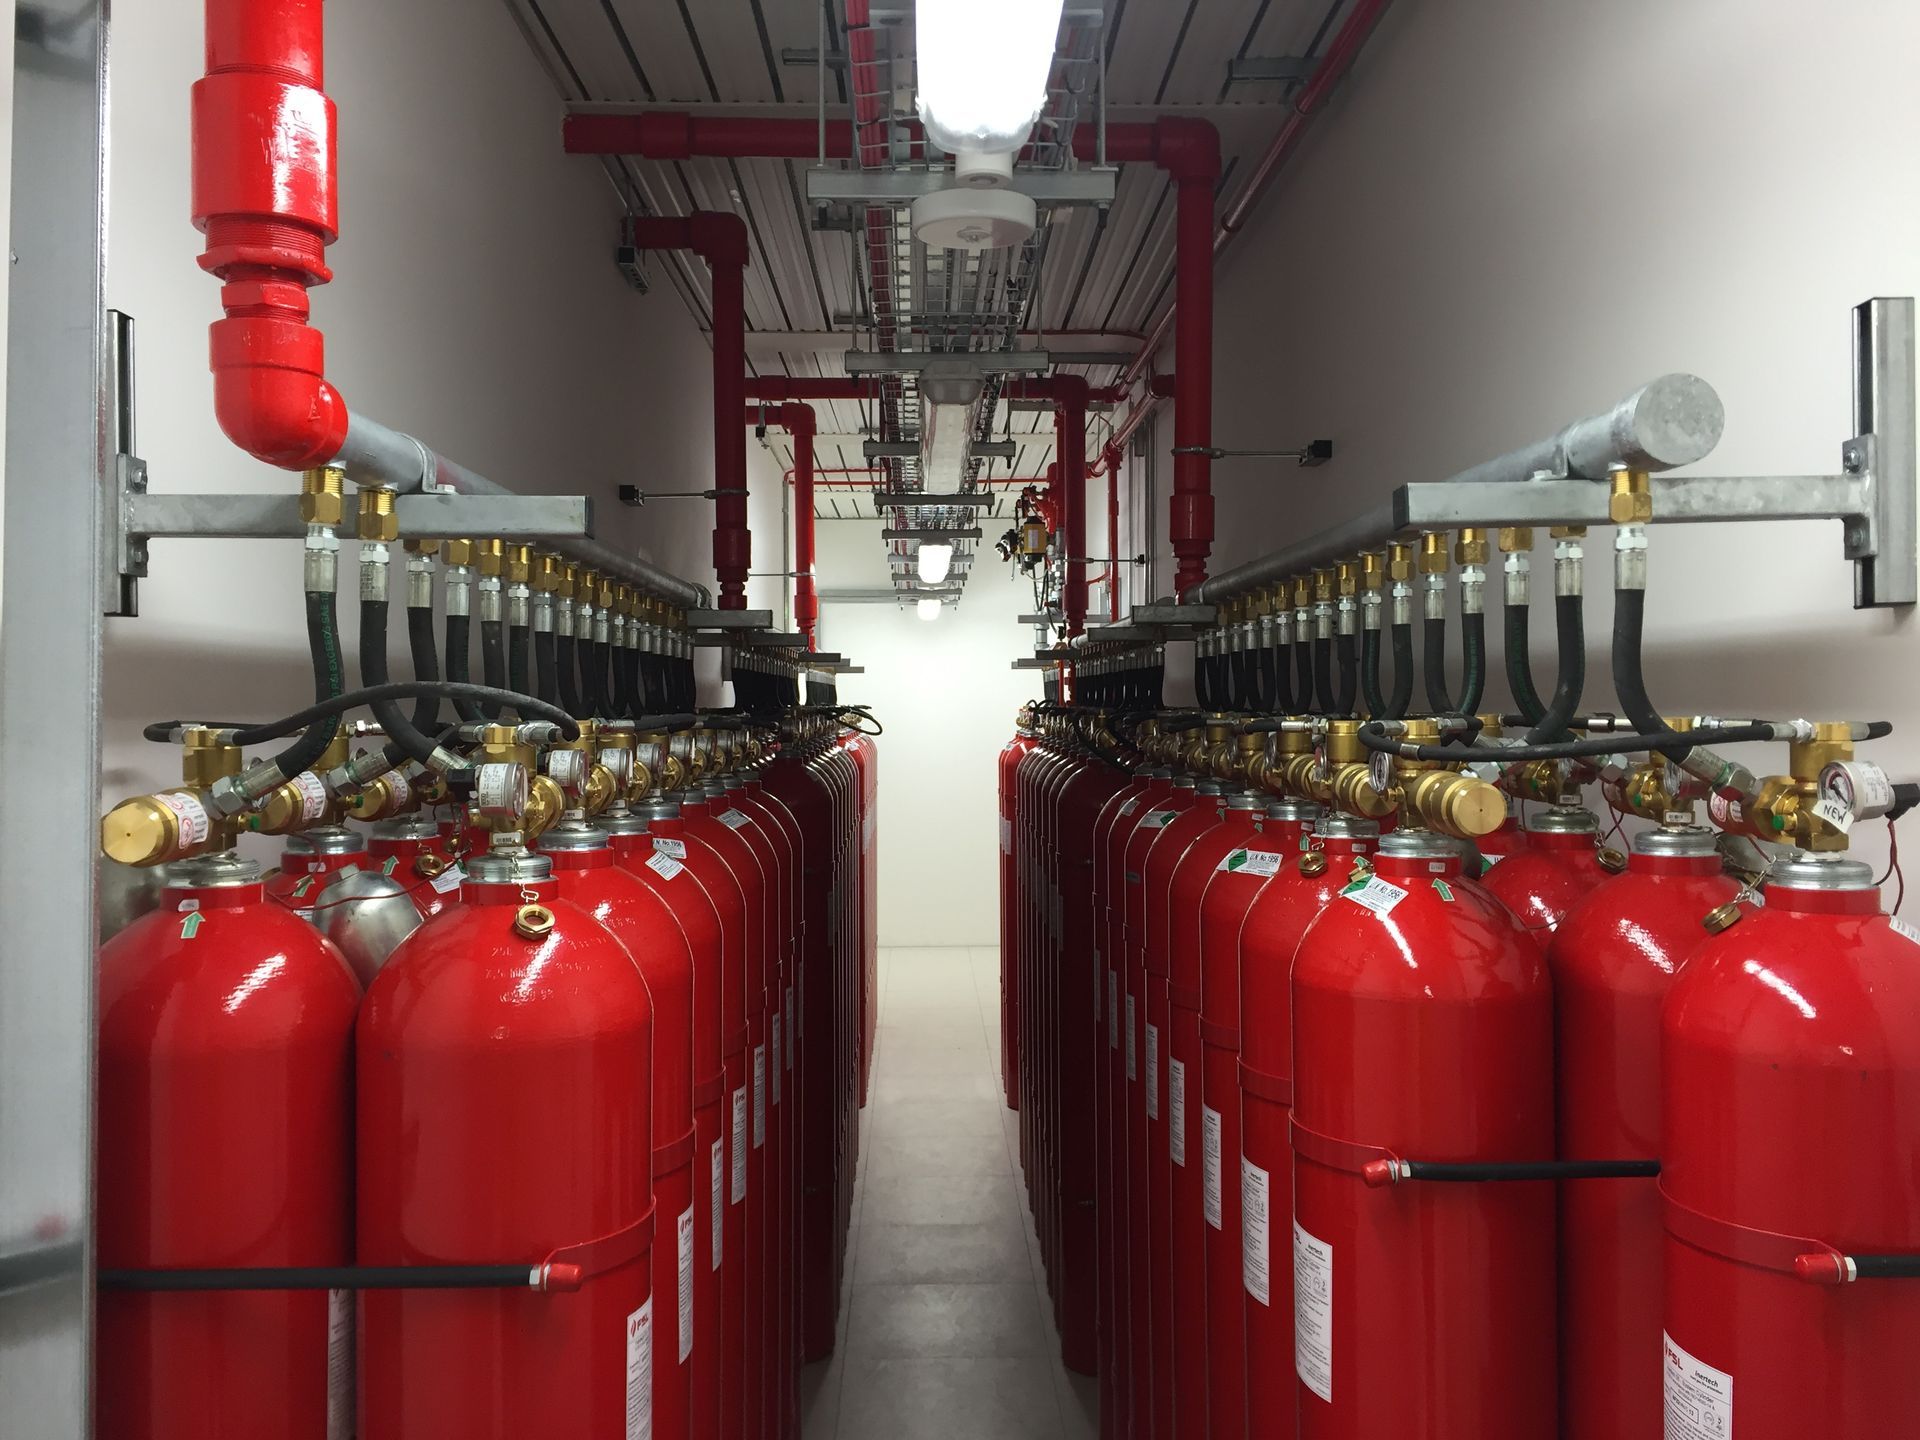 A row of red fire extinguishers are lined up in a room.